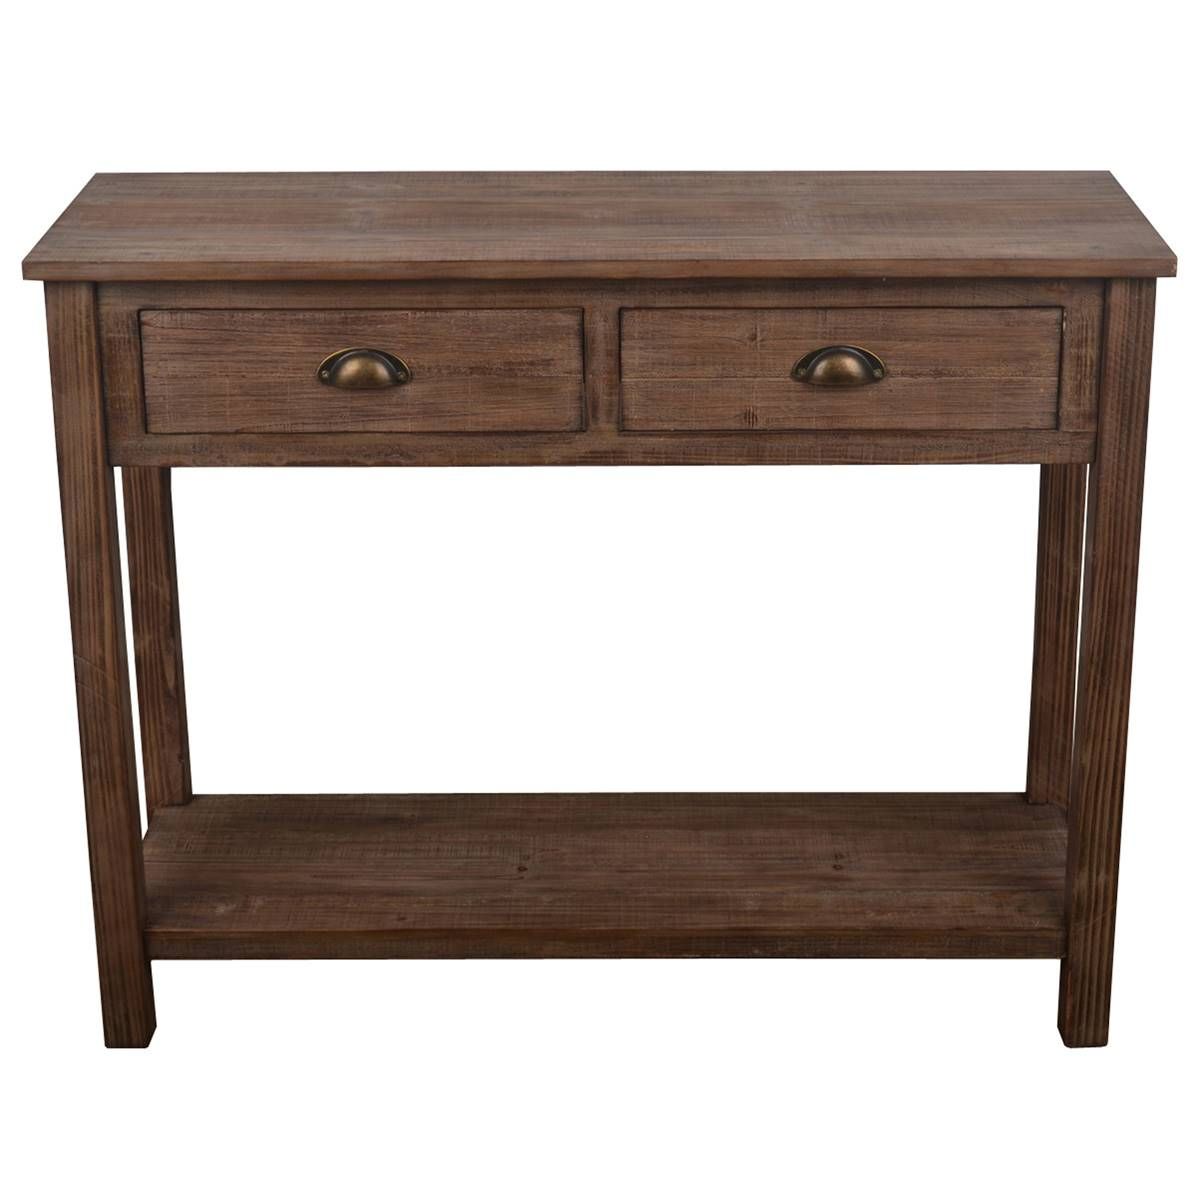 Décor Therapy Vintage Distressed Wooden Console Table Inside Square Weathered White Wood Console Tables (View 16 of 20)